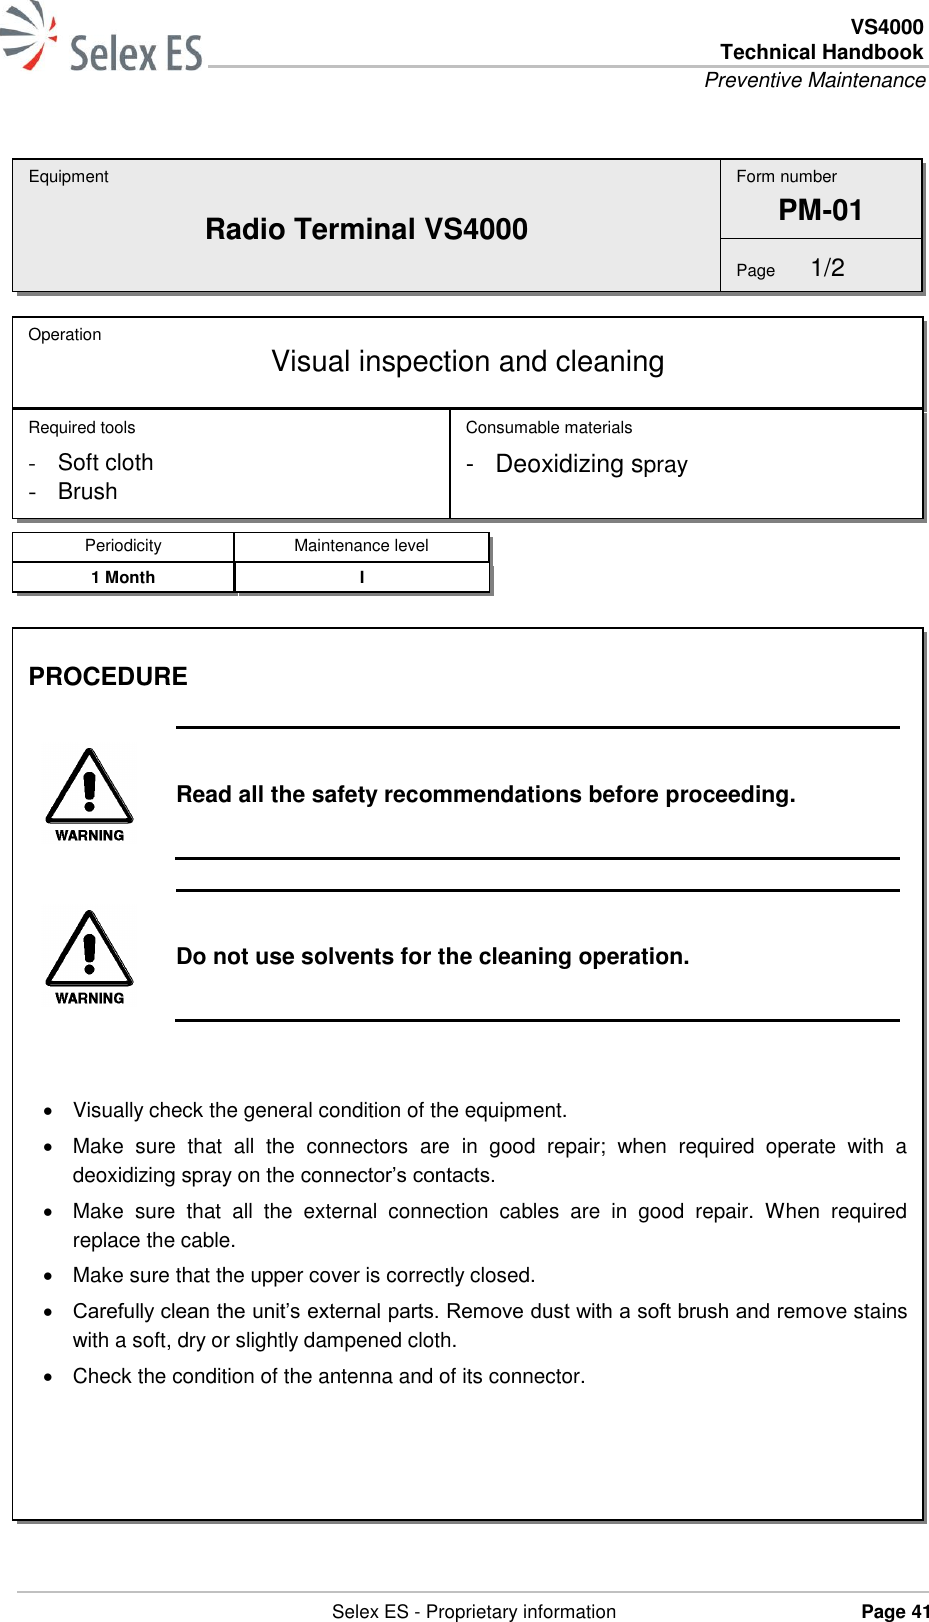  VS4000 Technical Handbook Preventive Maintenance   Selex ES - Proprietary information Page 41     Equipment Radio Terminal VS4000 Operation  Visual inspection and cleaning Required tools - Soft cloth - Brush Consumable materials -  Deoxidizing spray Form number PM-01 Page  1/2 Periodicity Maintenance level 1 Month I PROCEDURE   Read all the safety recommendations before proceeding.   Do not use solvents for the cleaning operation.     Visually check the general condition of the equipment.   Make  sure  that  all  the  connectors  are  in  good  repair;  when  required  operate  with  a deoxidizing spray on the connector’s contacts.   Make  sure  that  all  the  external  connection  cables  are  in  good  repair.  When  required replace the cable.   Make sure that the upper cover is correctly closed.  Carefully clean the unit’s external parts. Remove dust with a soft brush and remove stains with a soft, dry or slightly dampened cloth.   Check the condition of the antenna and of its connector.  